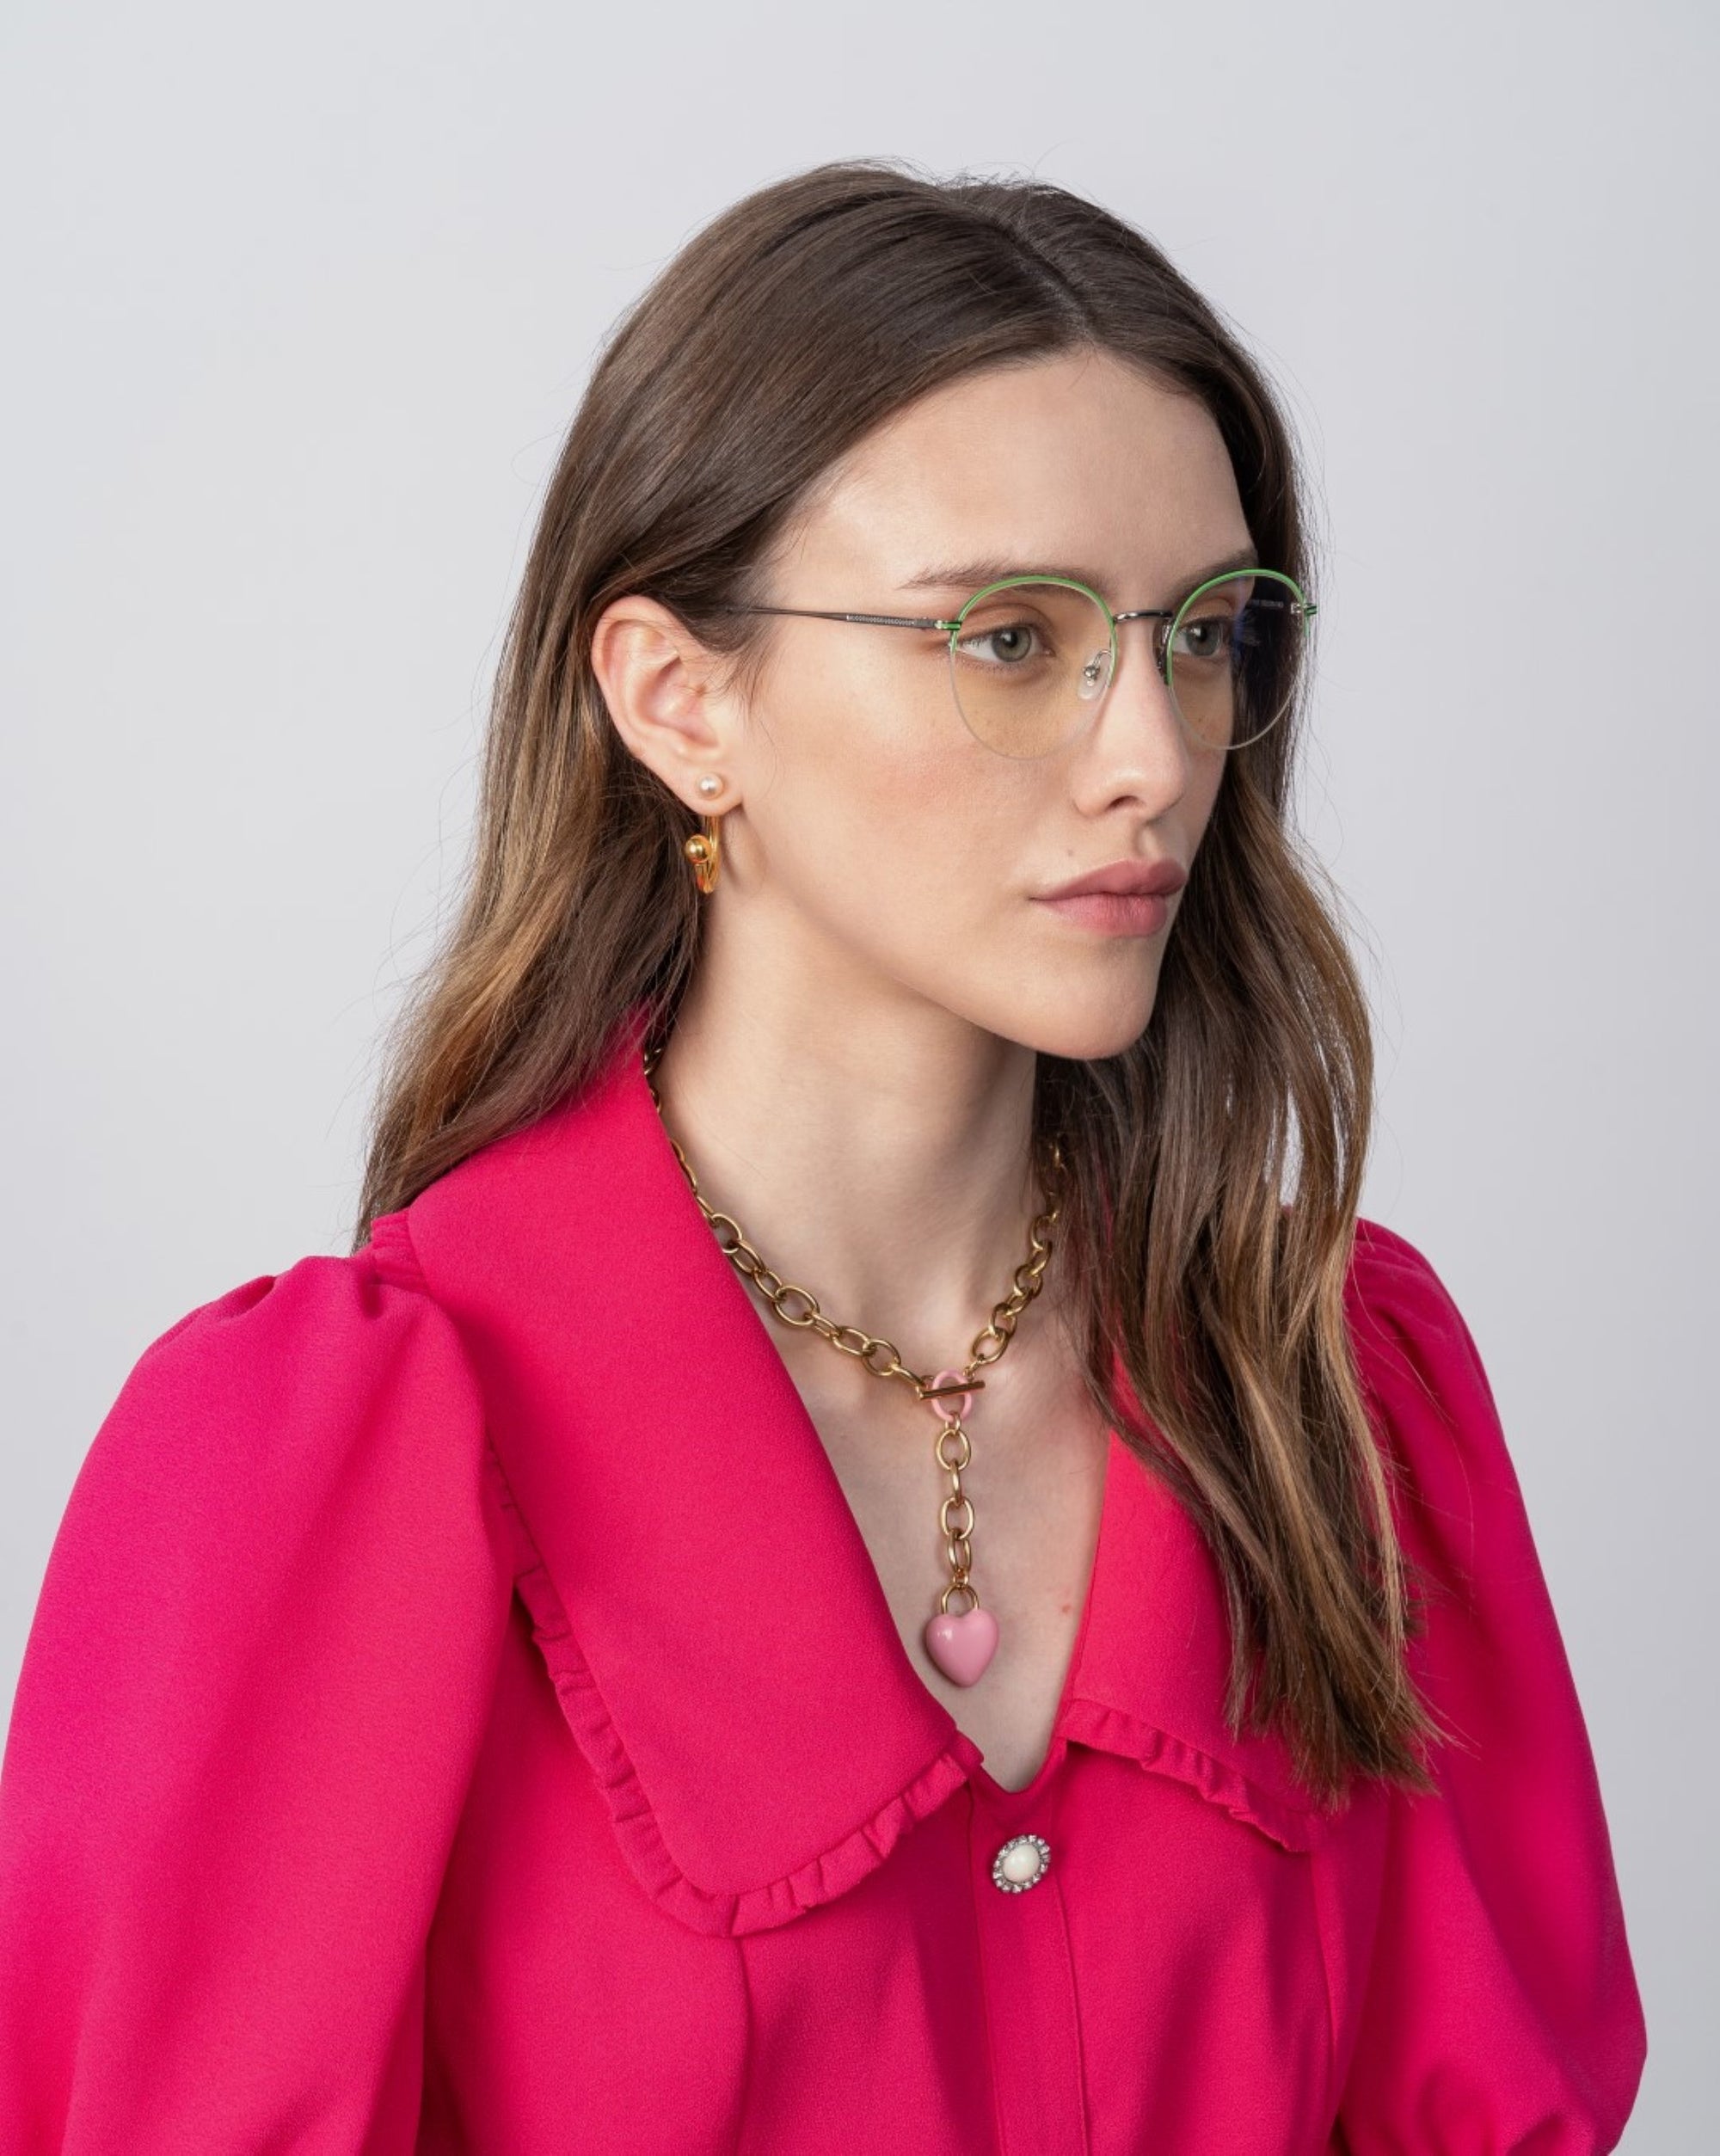 A person with long brown hair, wearing For Art&#39;s Sake® Ivy glasses with a blue light filter and a vibrant fuchsia blouse with a ruffled collar, looks to the left. They have a gold necklace with a heart pendant and small hoop earrings. The background is plain and light-colored.